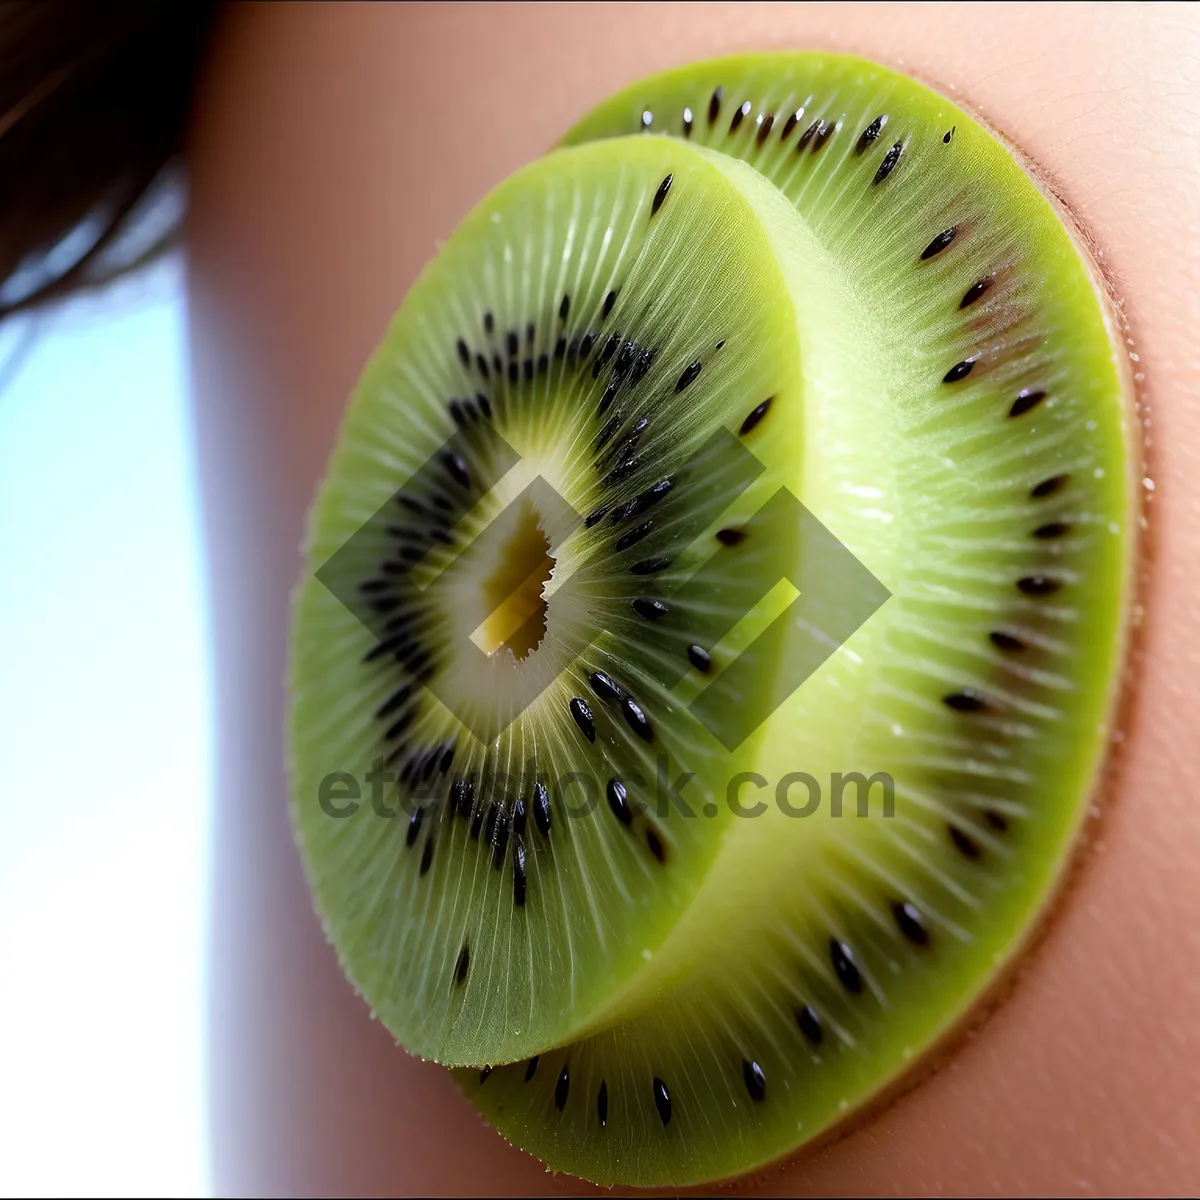 Picture of Juicy Kiwi Slice - Refreshing and Nutritious Tropical Fruit Dessert